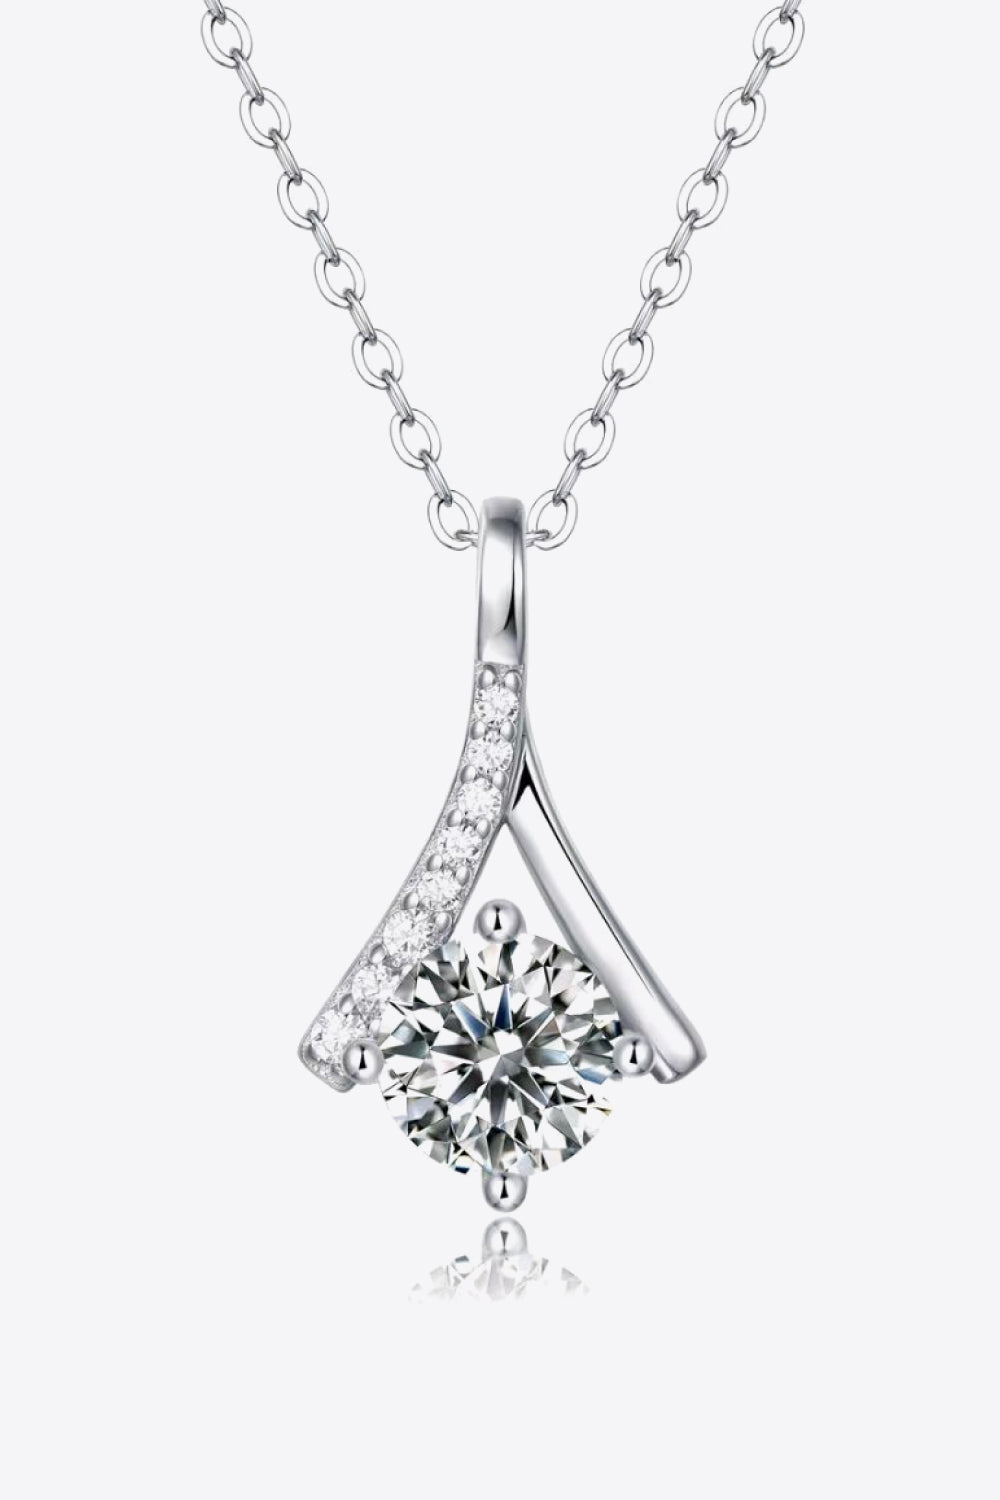 Special Occasion 1 Carat Moissanite Pendant Necklace - Necklaces - FITGGINS